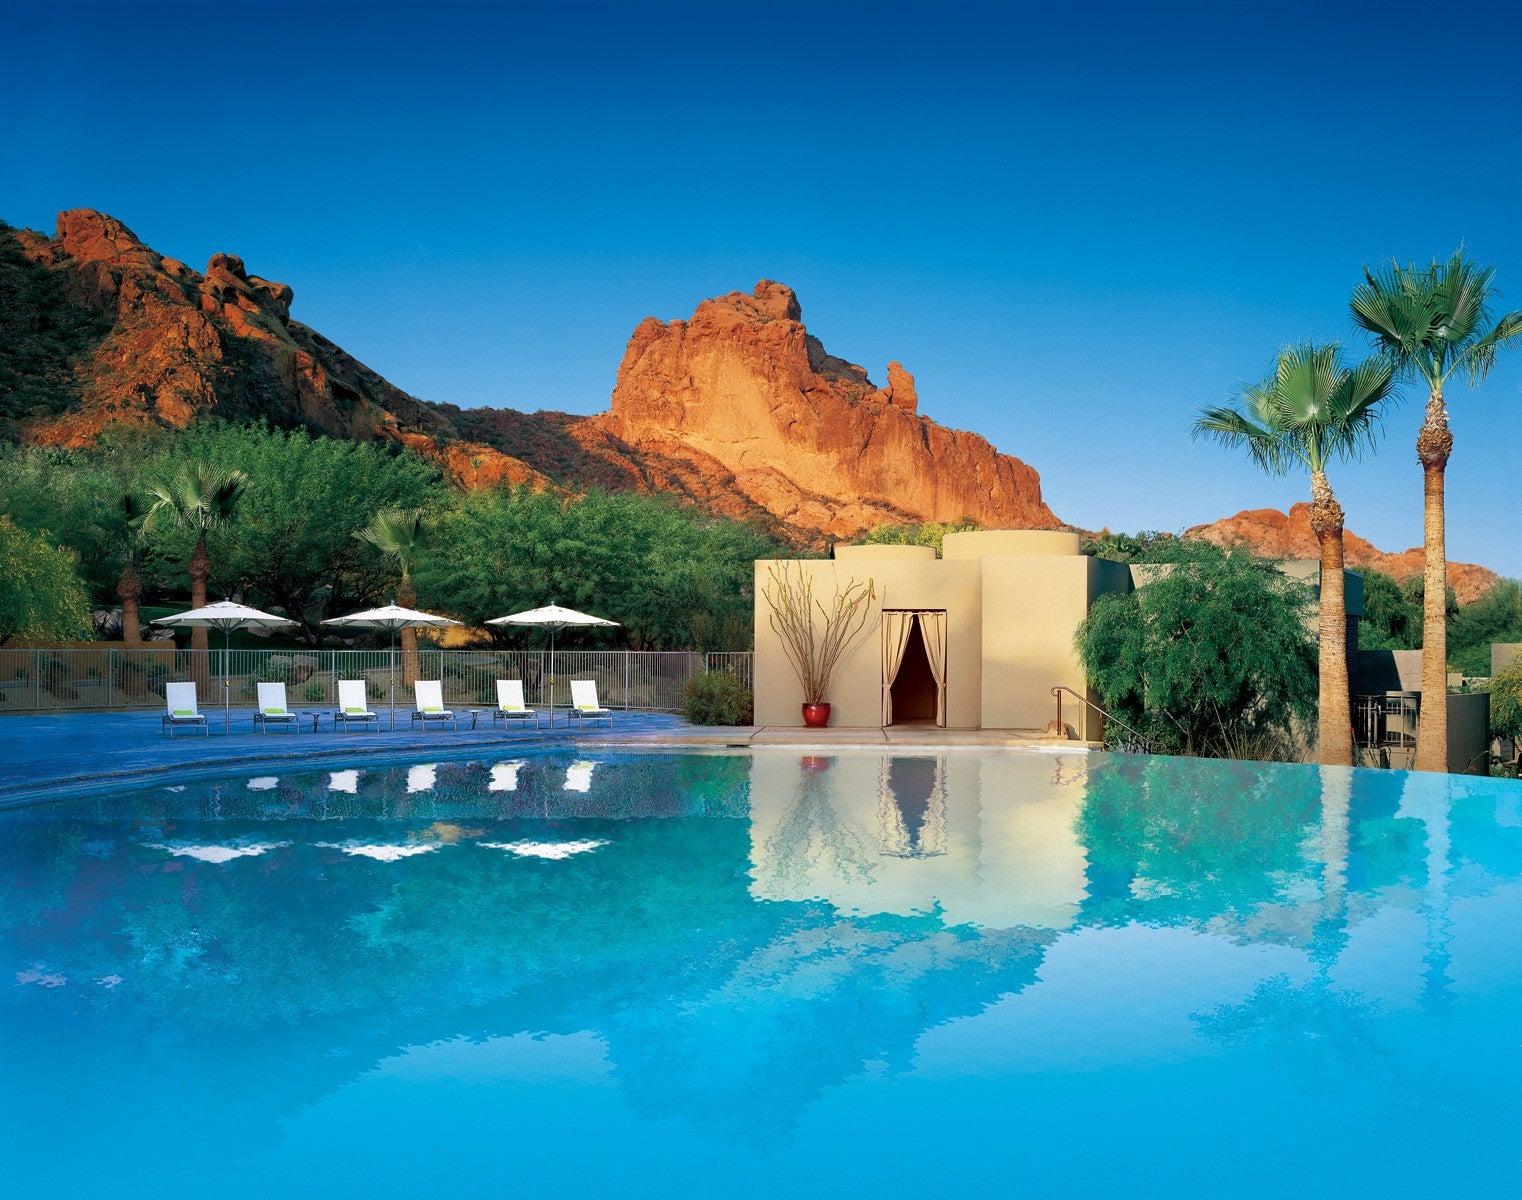 Sanctuary on Camelback Mountain - use this one